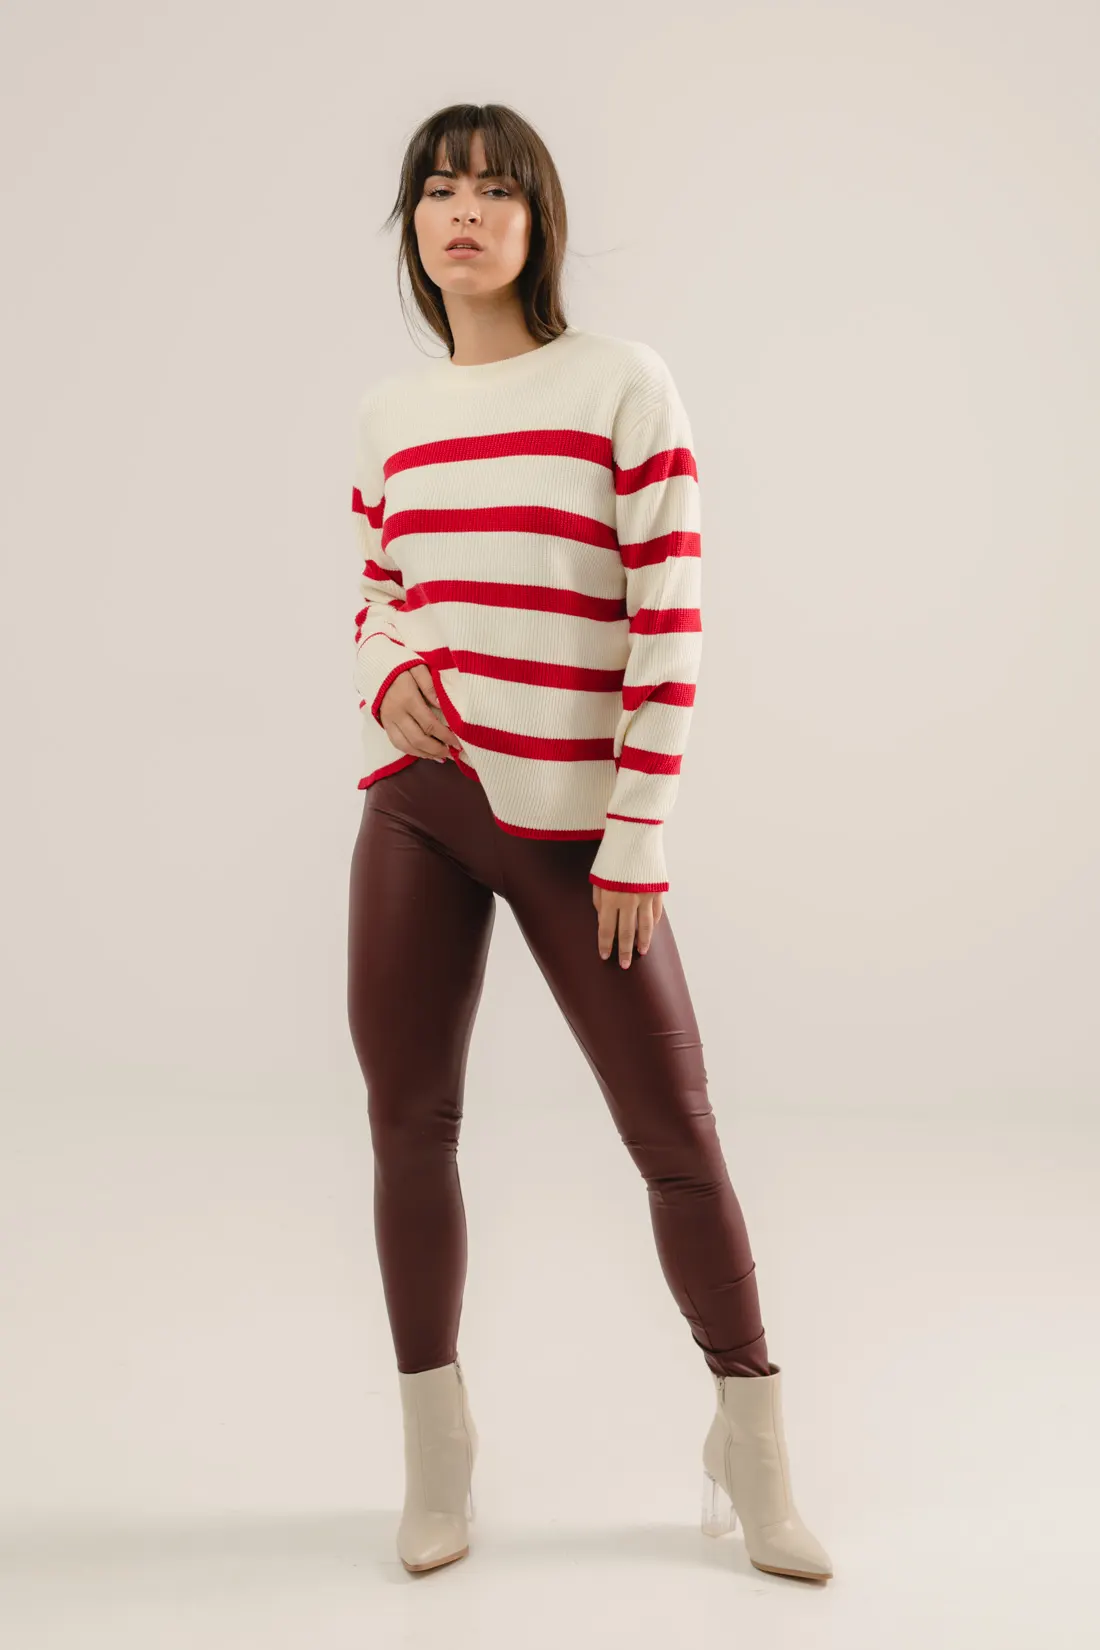 GERMO SWEATER - RED